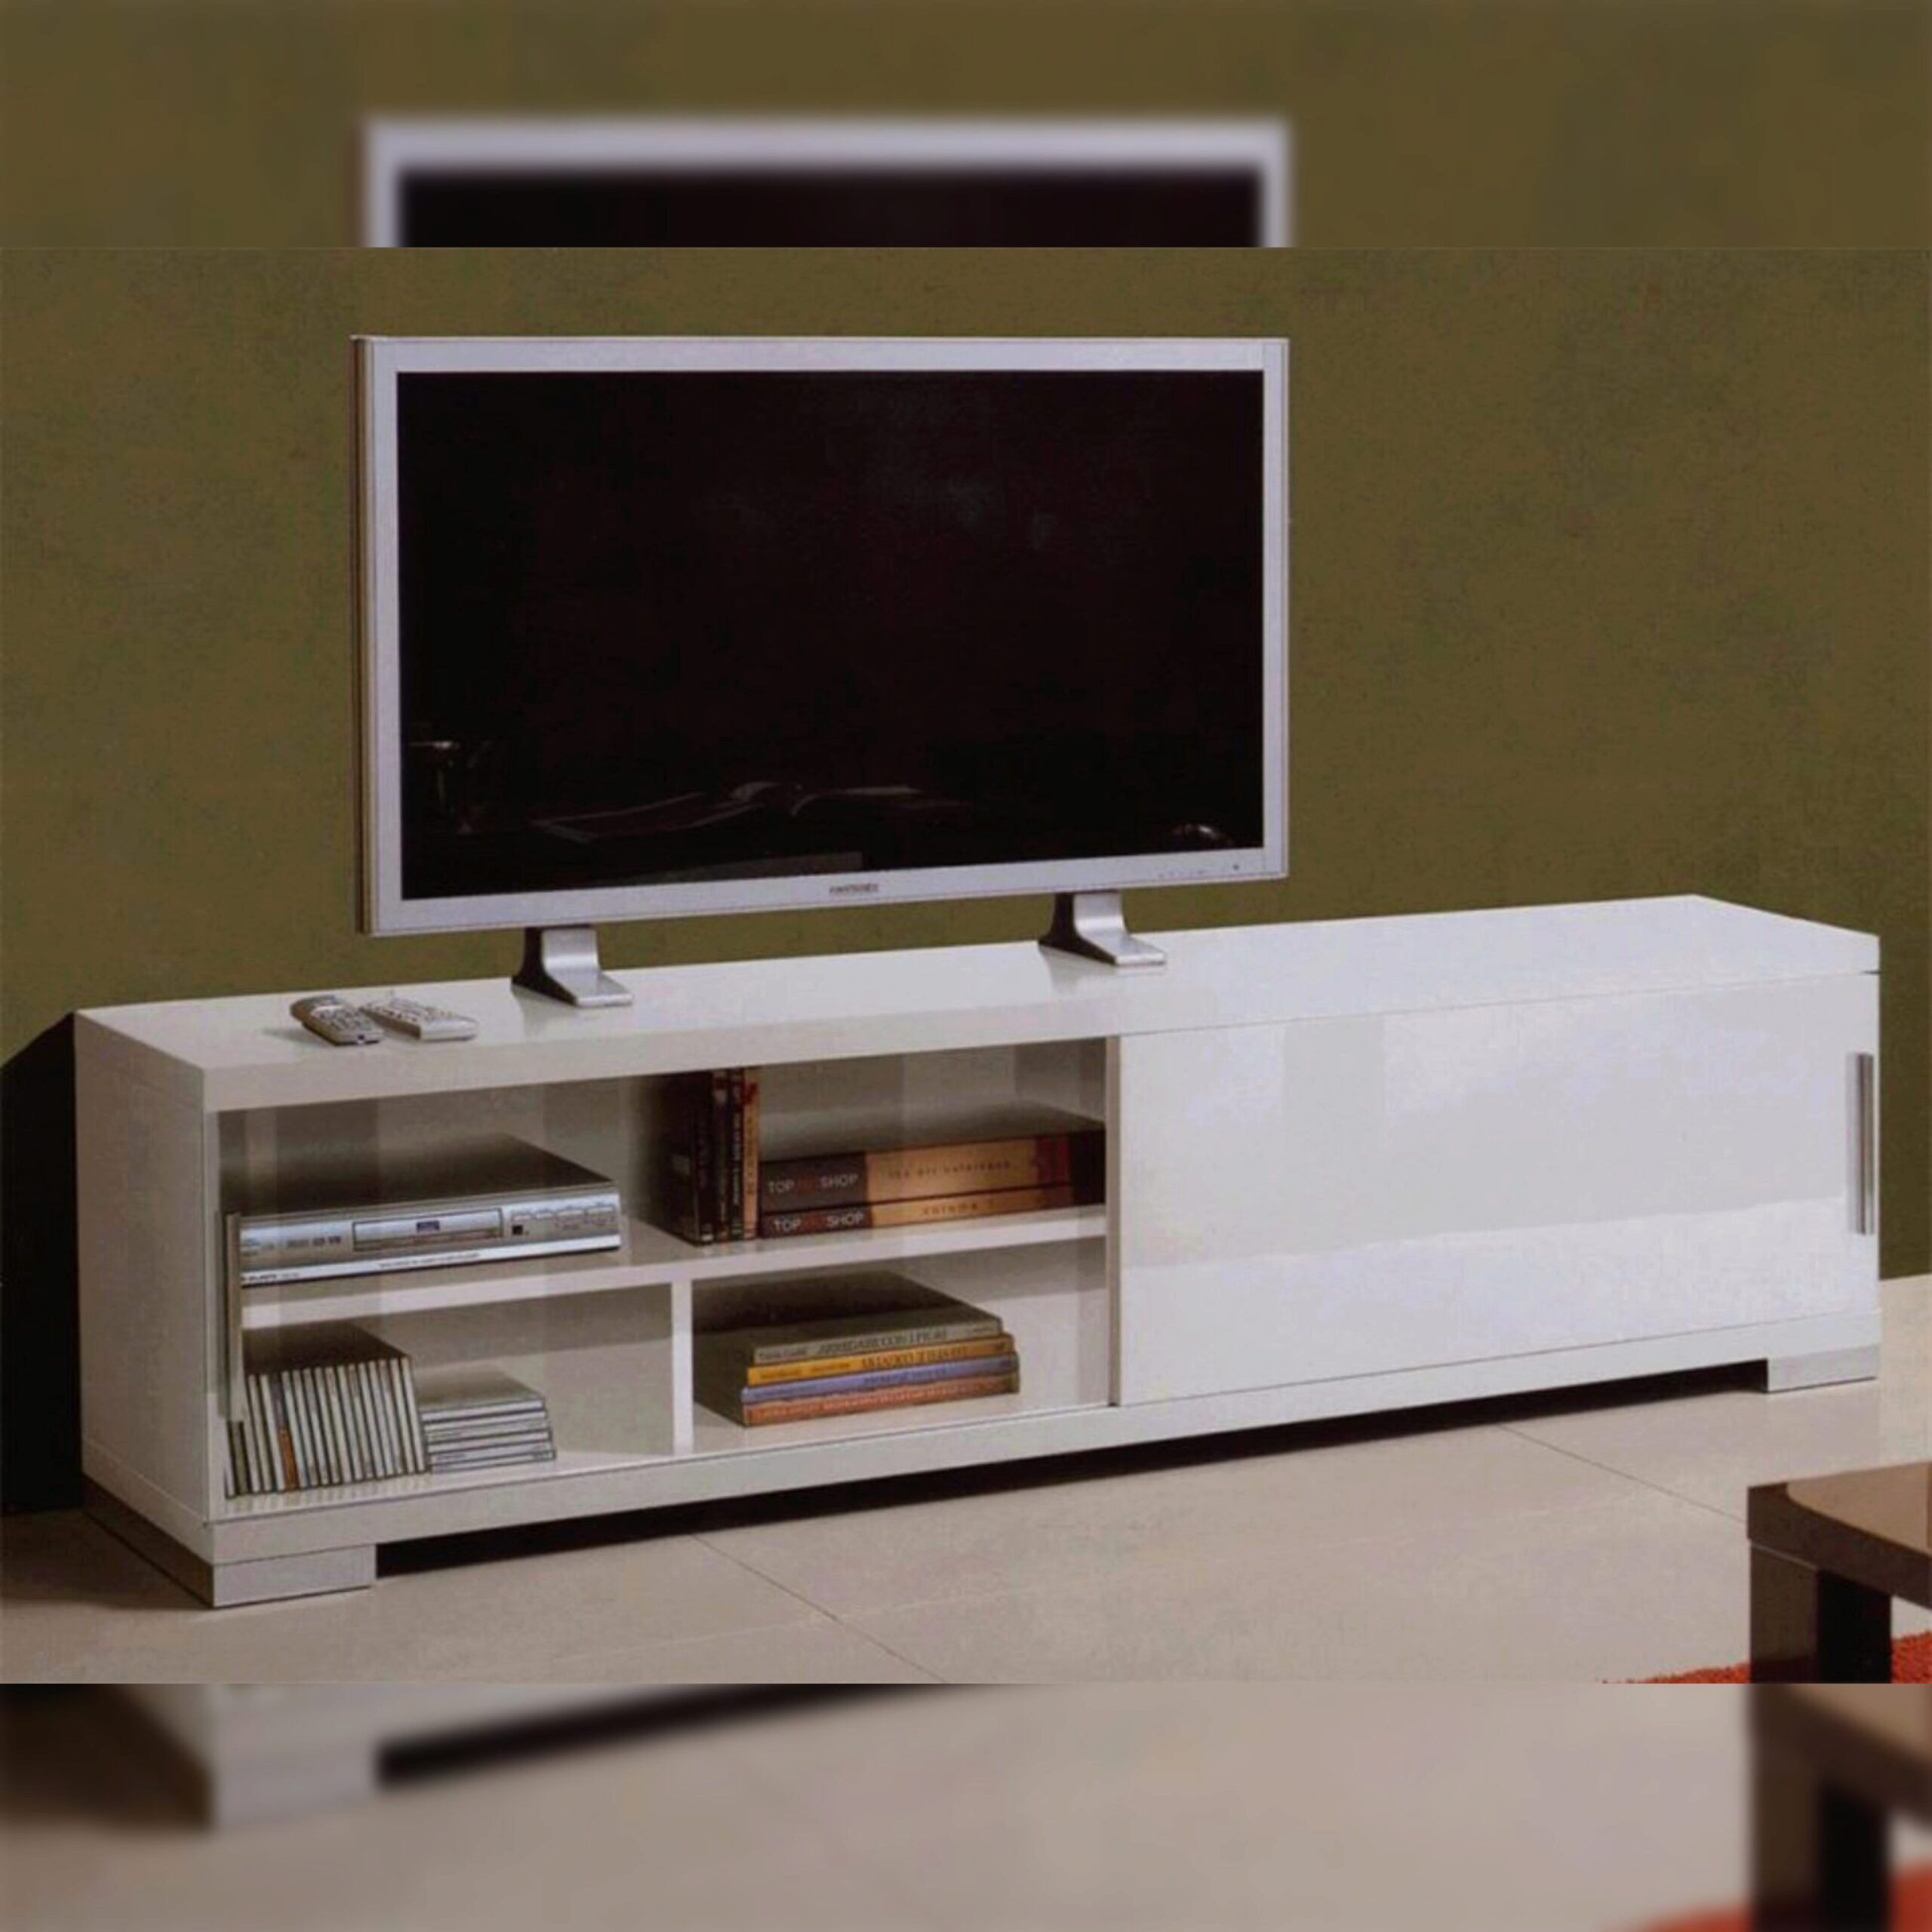 High Gloss White Lacquer Tv Stand Made In Italy Intended For Modern White Lacquer Tv Stands (View 11 of 15)